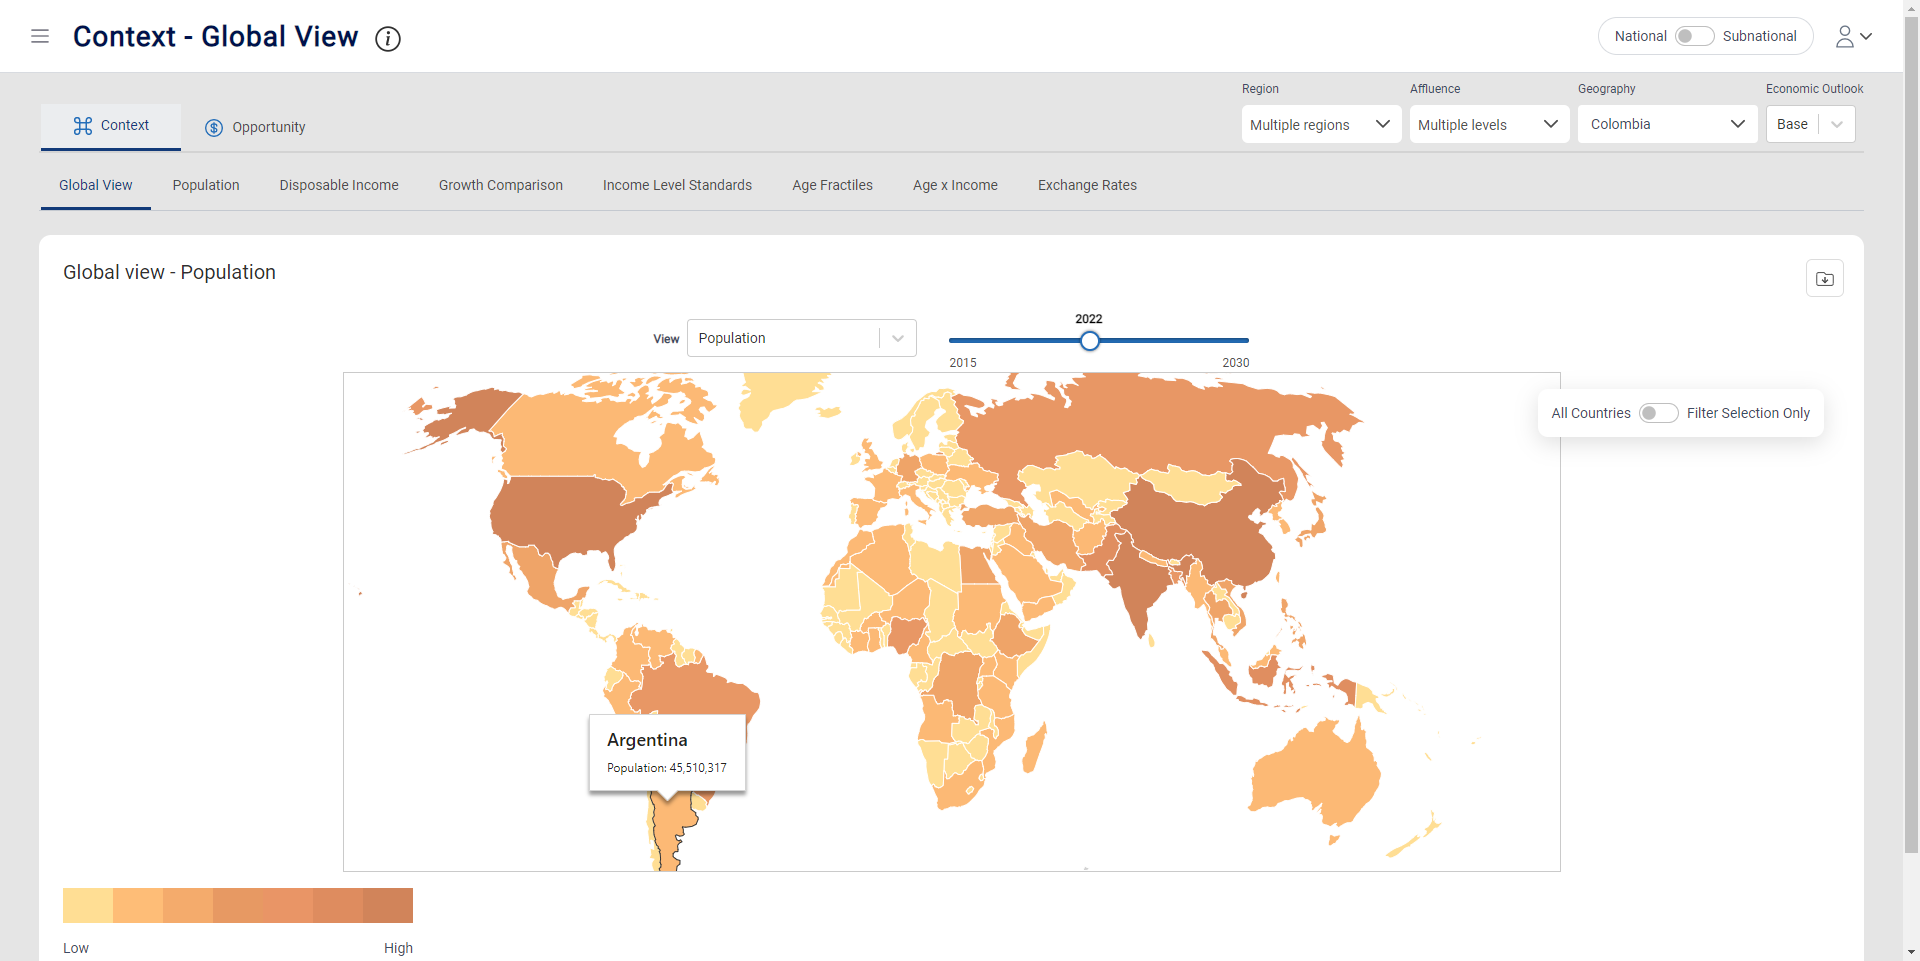 Explore contextual data including population, GDP and income for over 200 countries.